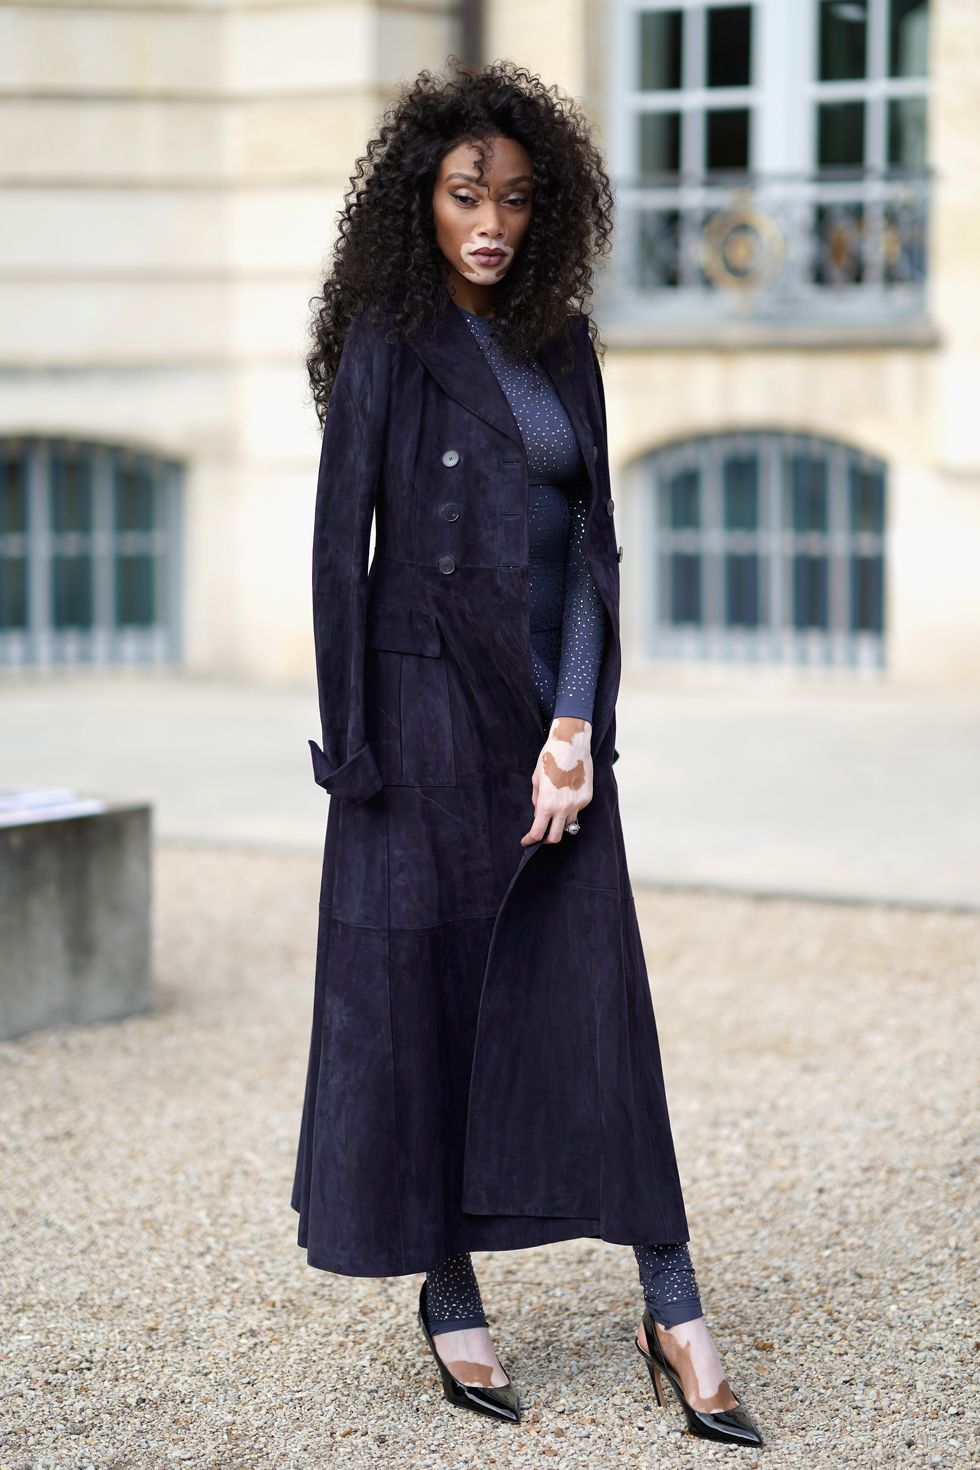 PARIS, FRANCE - SEPTEMBER 26:  Winnie Harlow attends the Christian Dior show as part of the Paris Fashion Week Womenswear Spring/Summer 2018 on September 26, 2017 in Paris, France.  (Photo by Edward Berthelot/Getty Images for Dior)